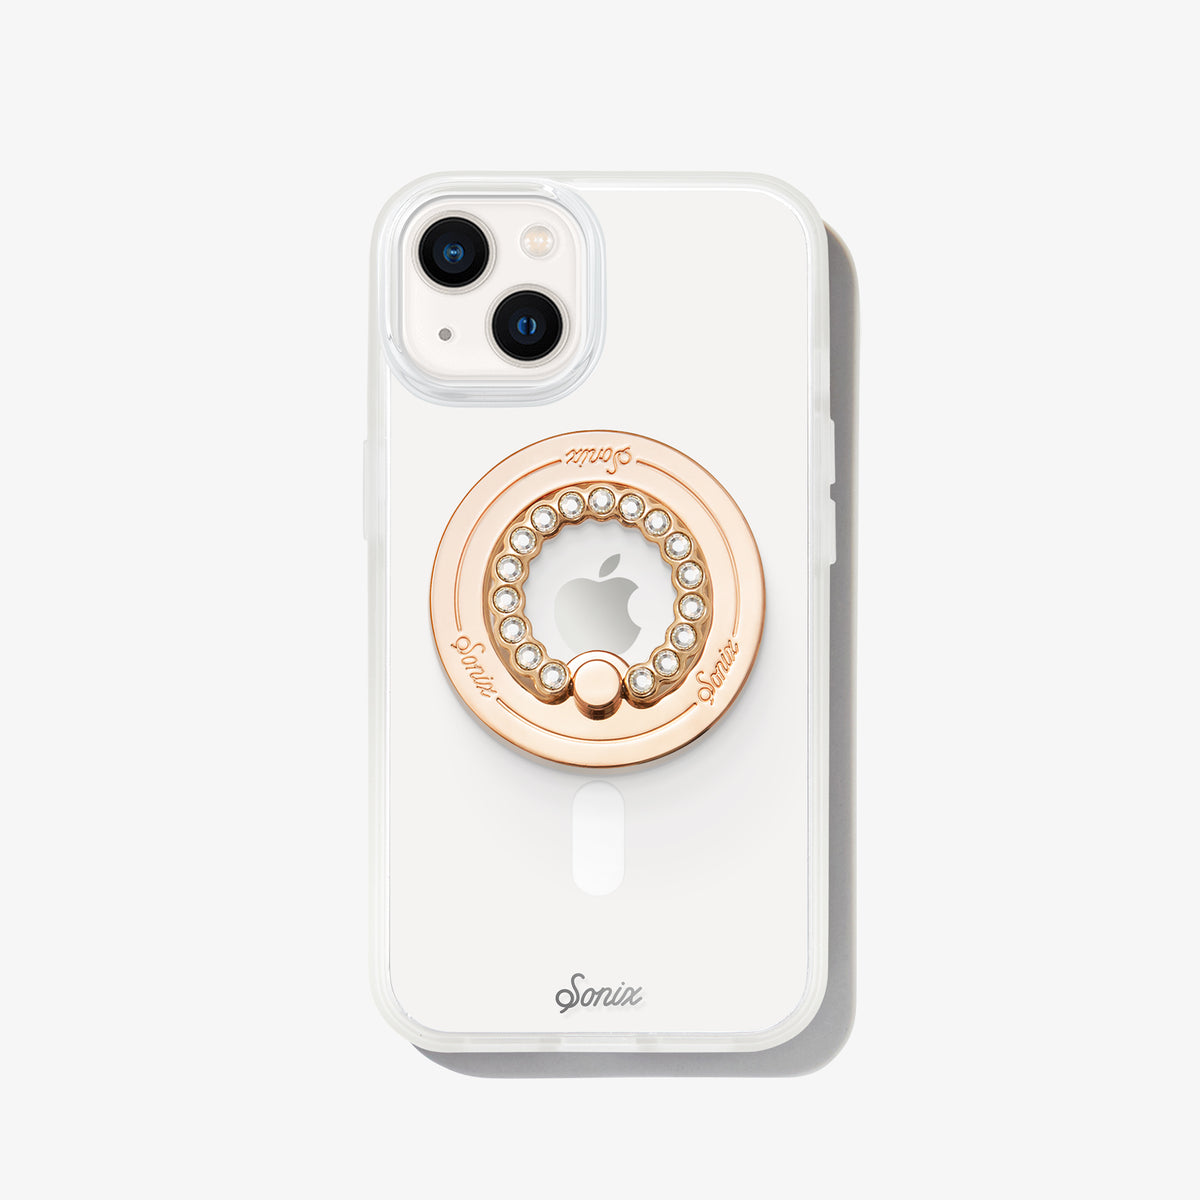 Removable Phone – Sonix